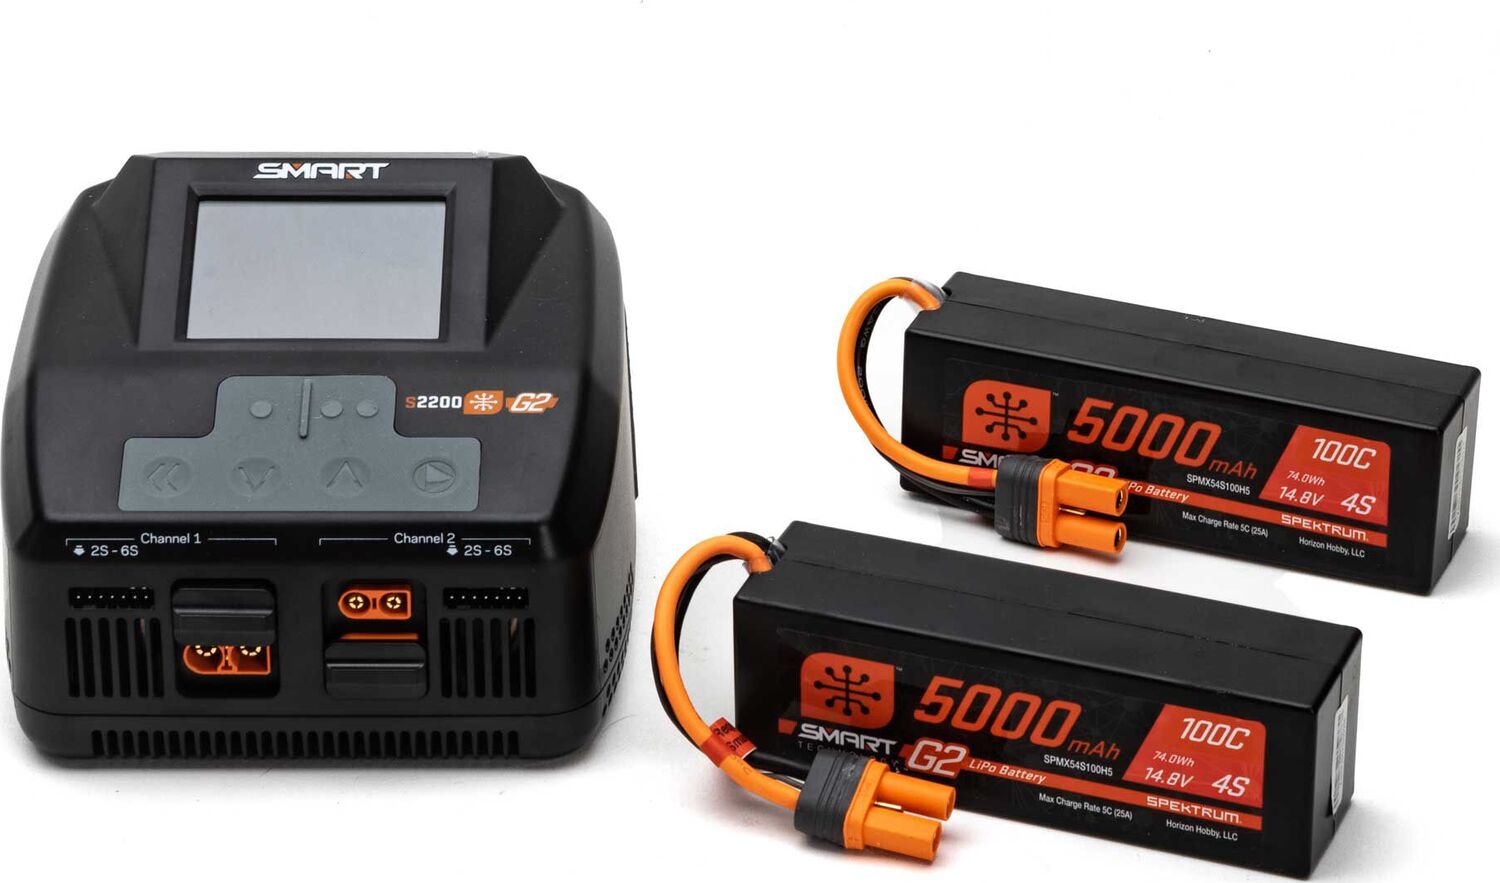 Smart G2 Powerstage 8S Surface Bundle: 4S 5000mAh LiPo Battery (2) / S2200 G2 Charger